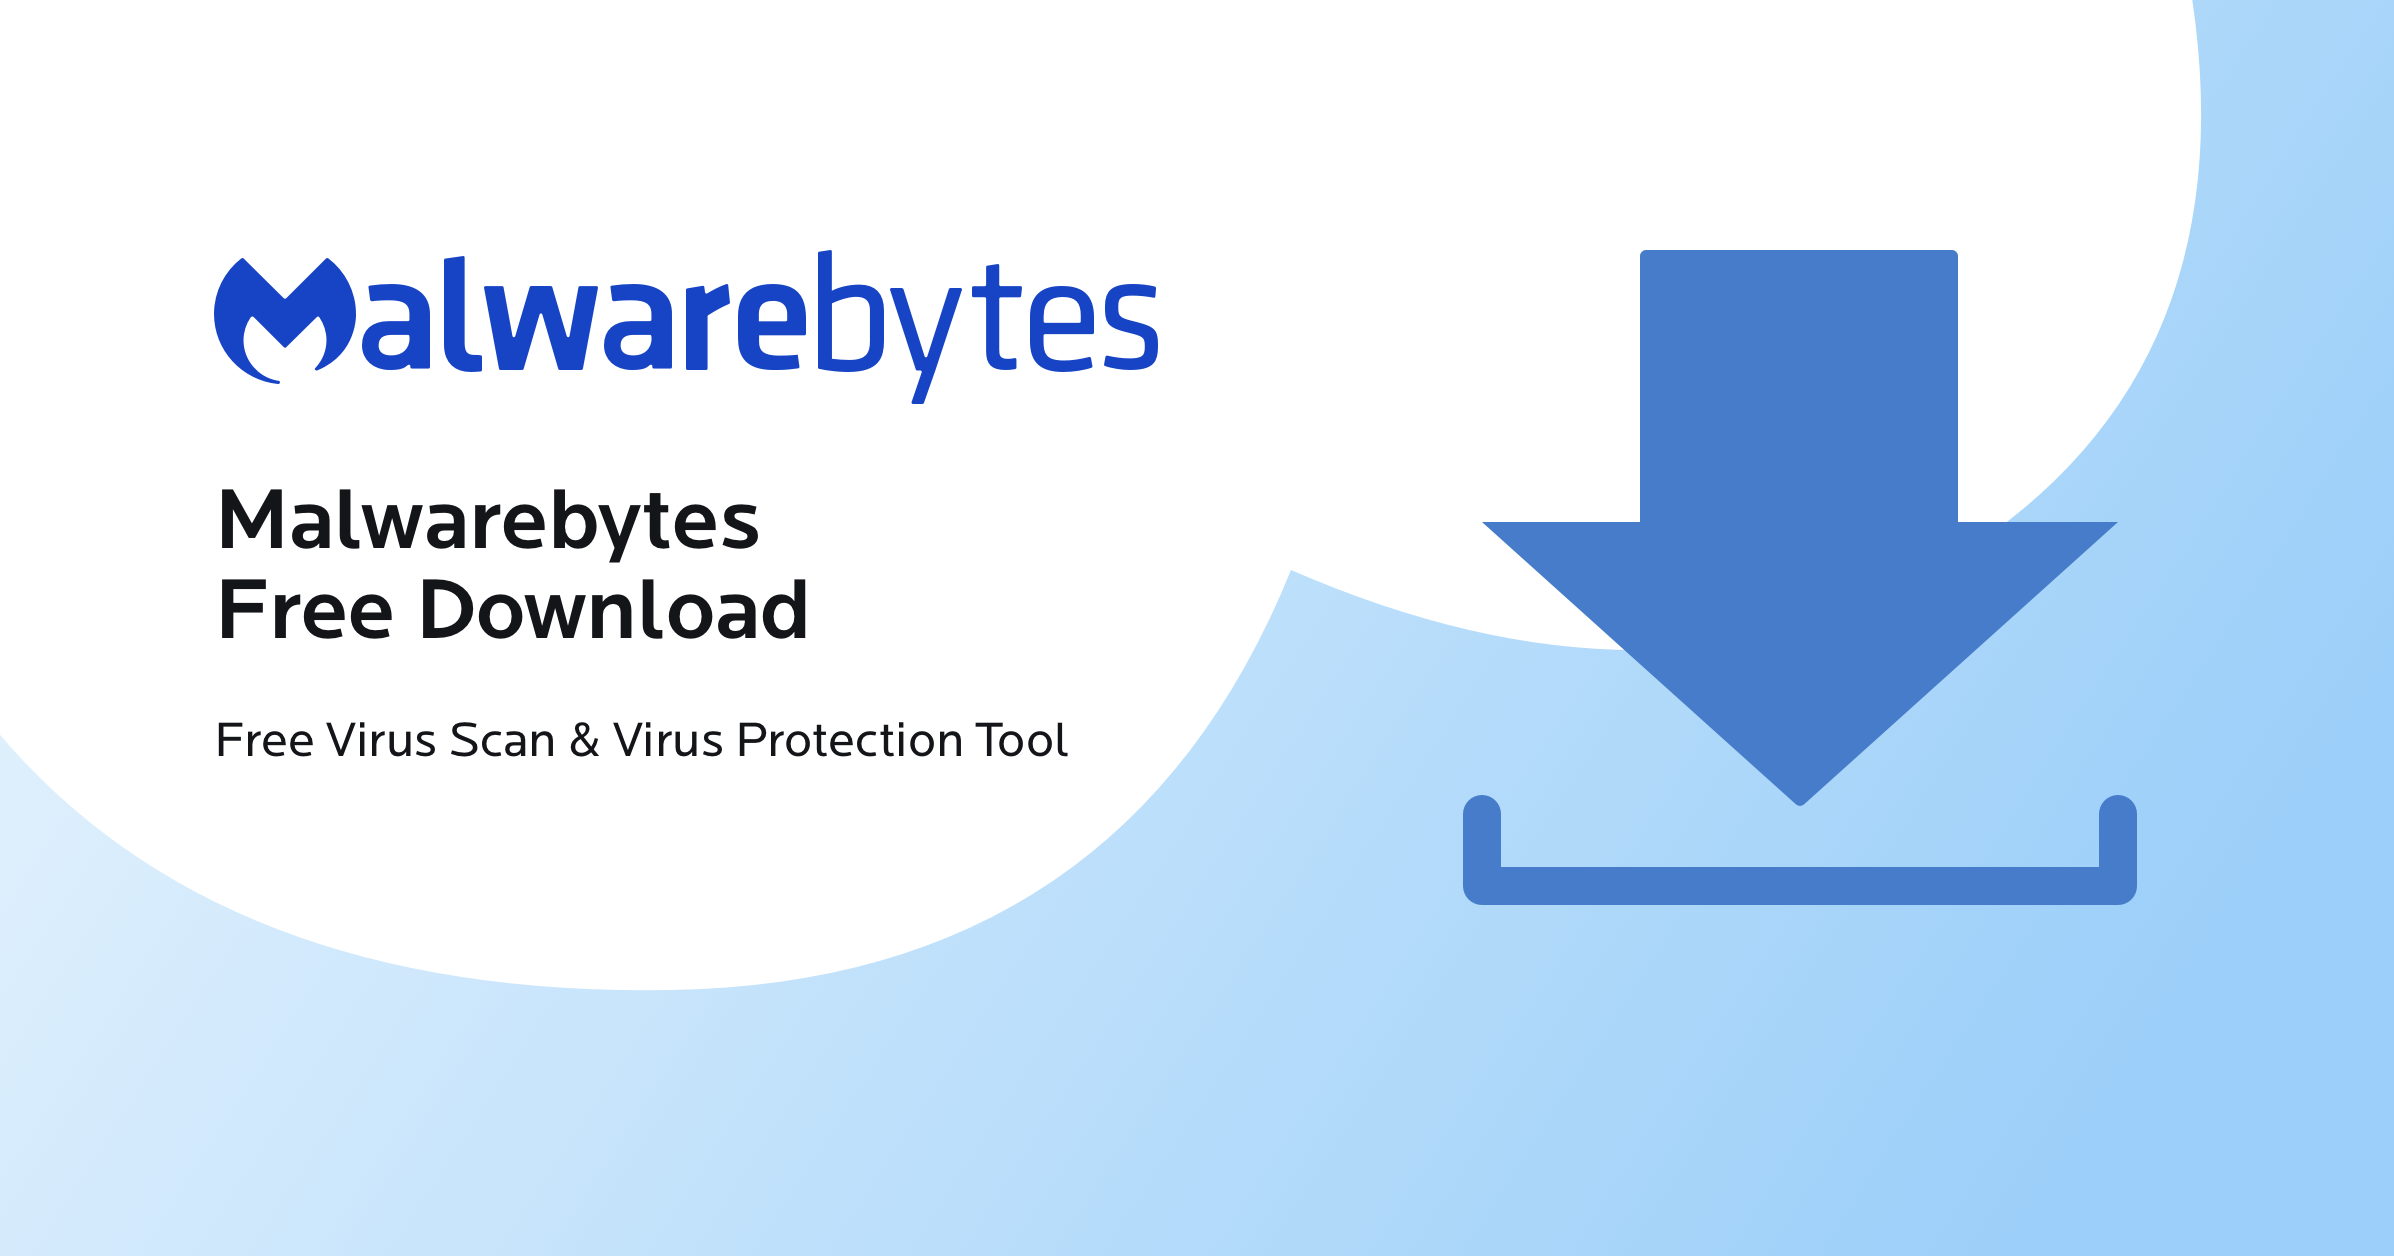 Download and install a reputable anti-malware program.
Run a full system scan.